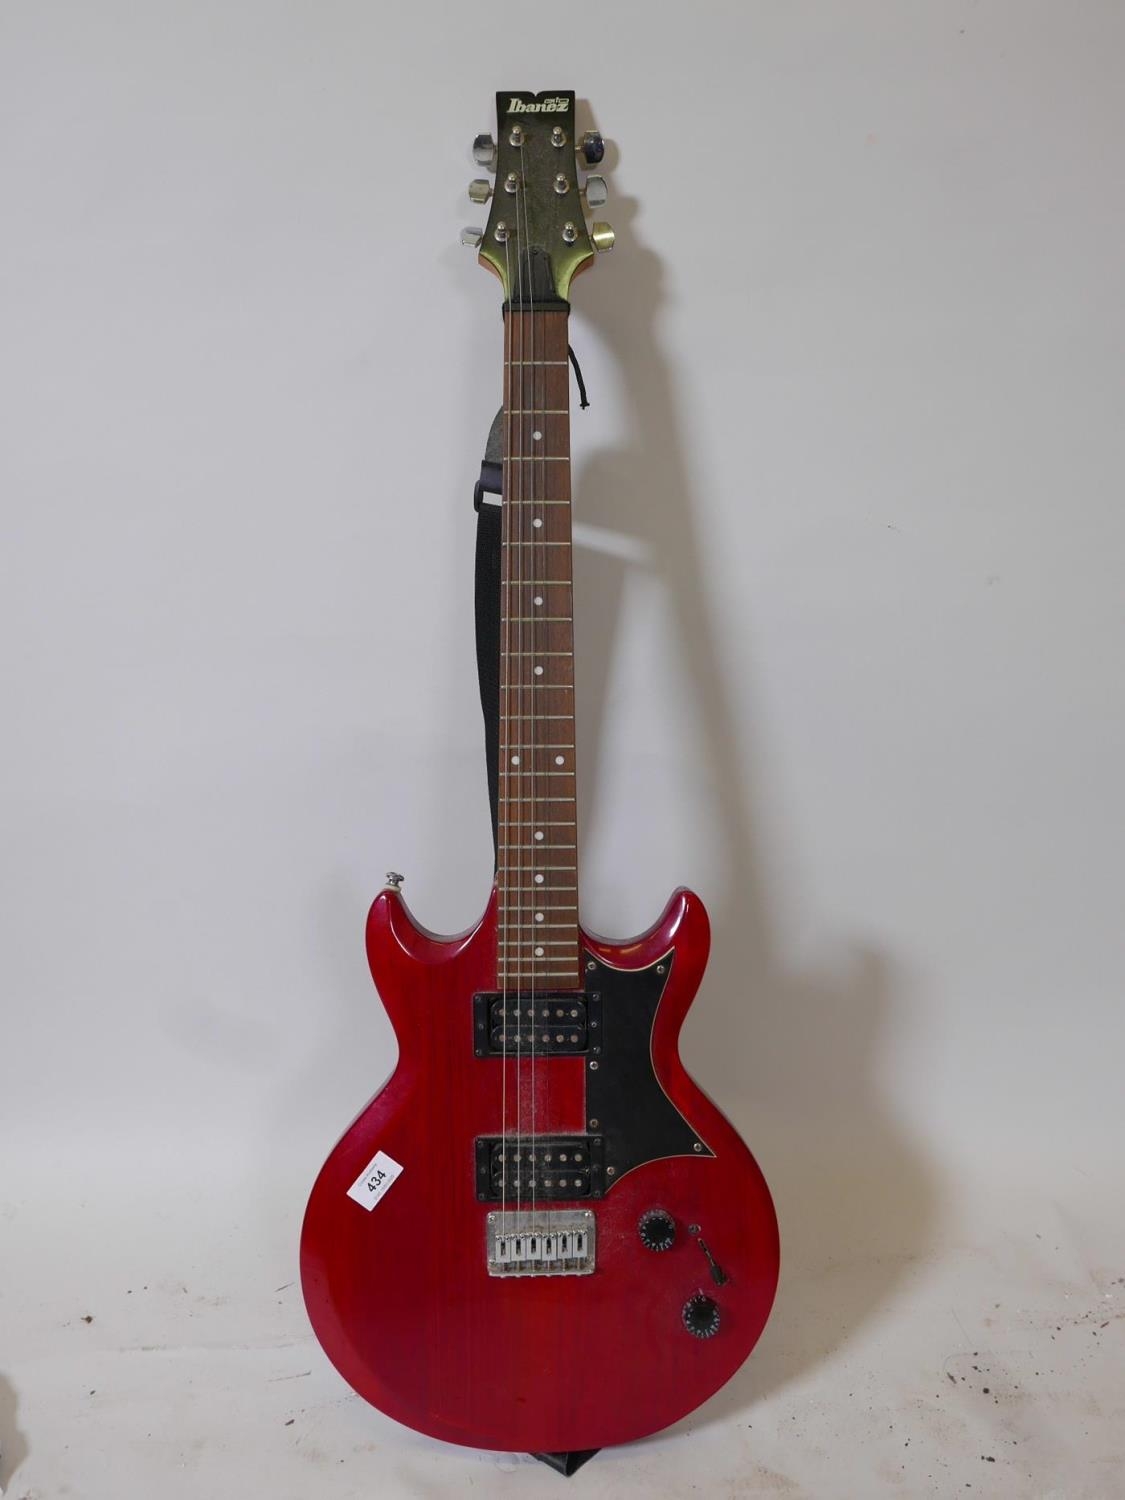 Where to find ibanez serial number